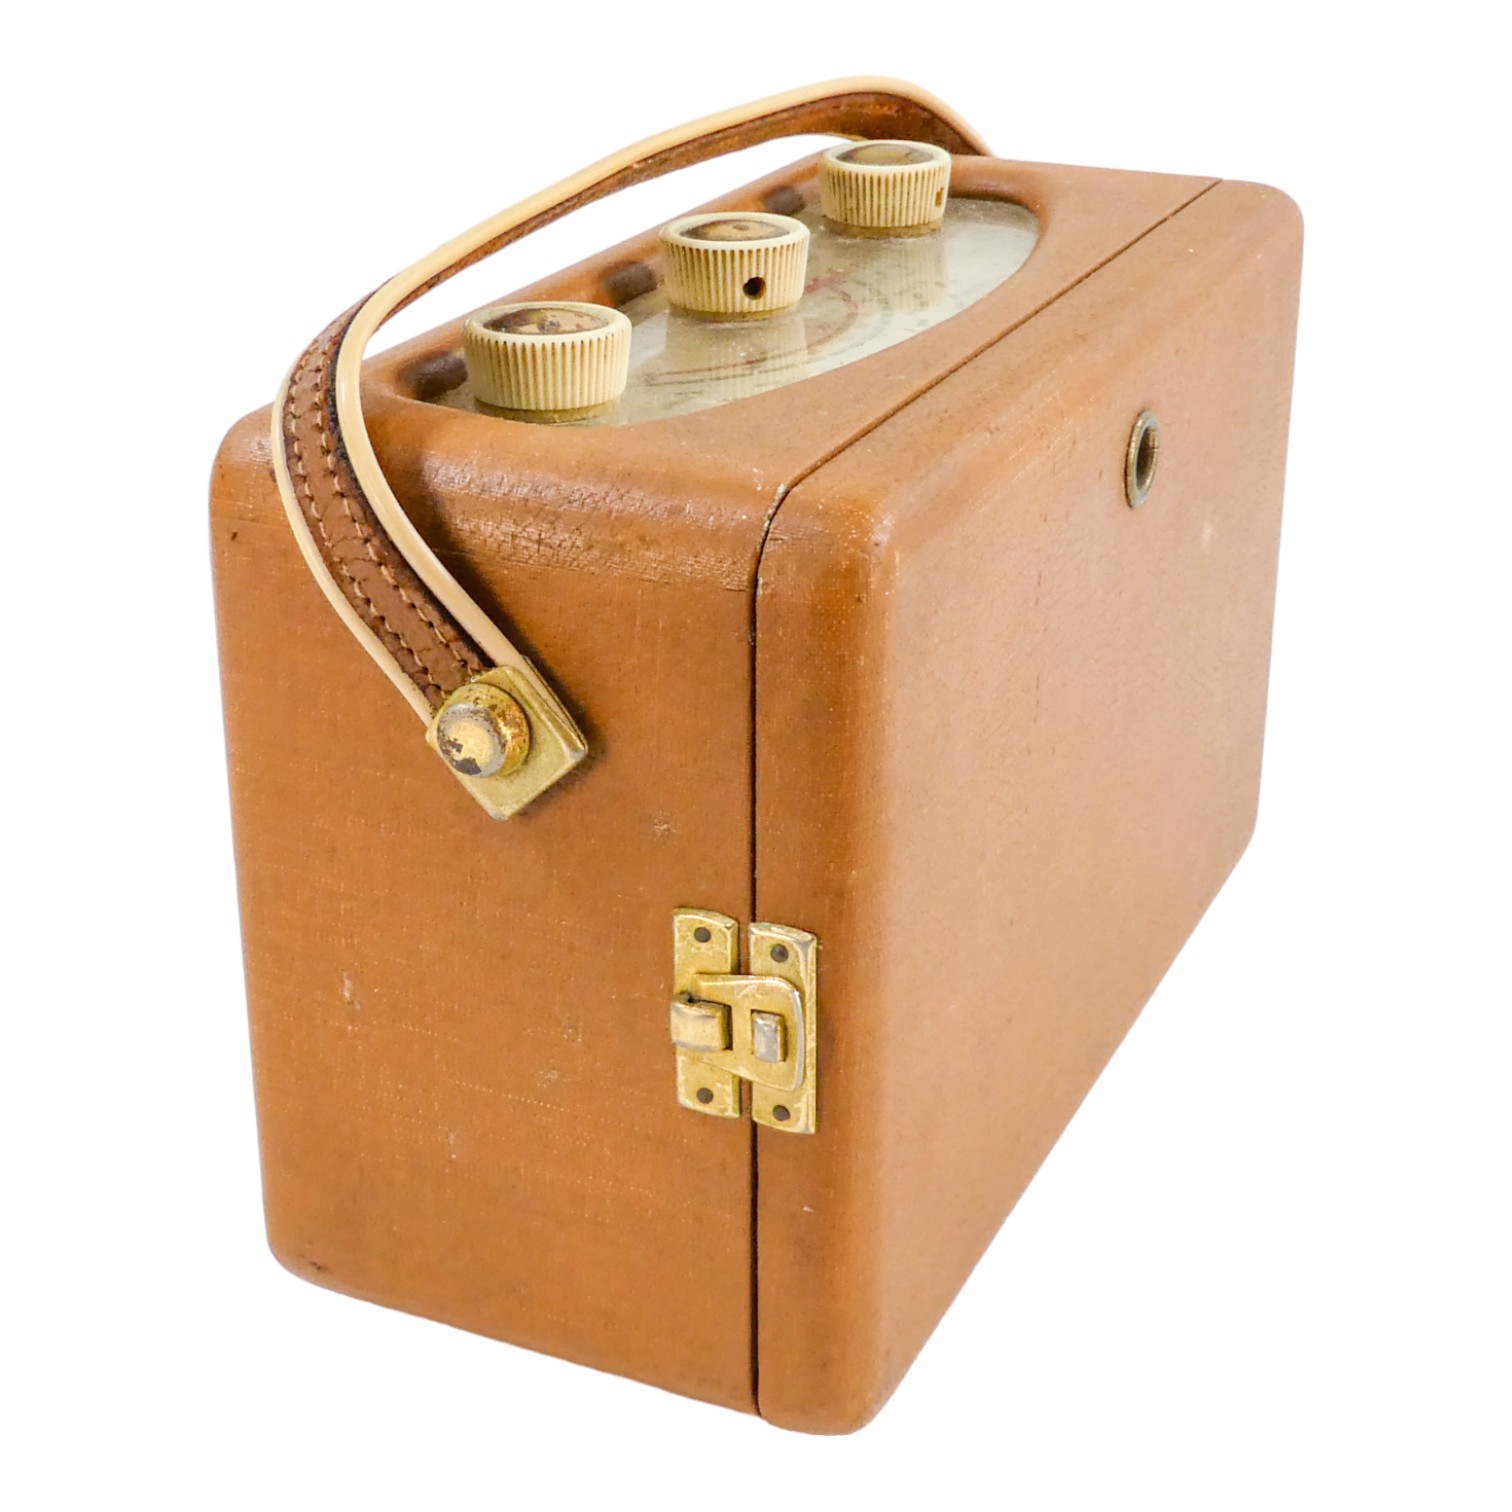 A 1960's Roberts radio - model R200, with sand coloured cloth case, width 23cm. - Image 5 of 5